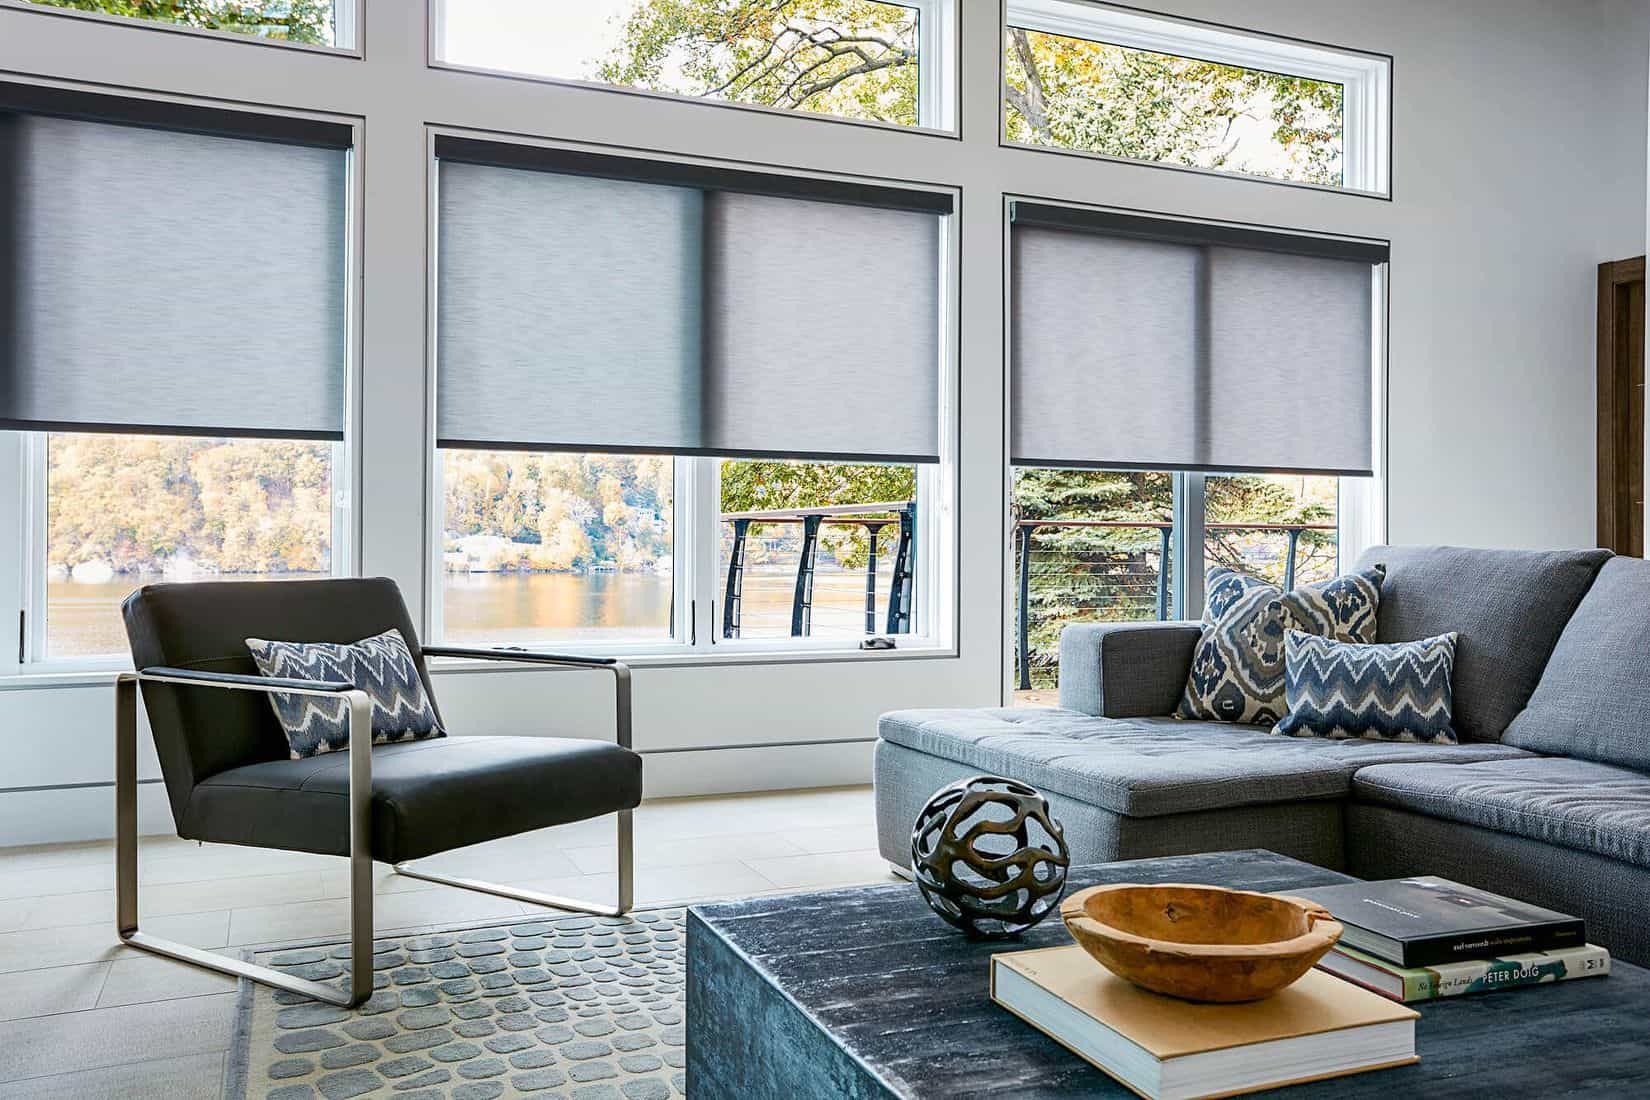 solar shades for living room